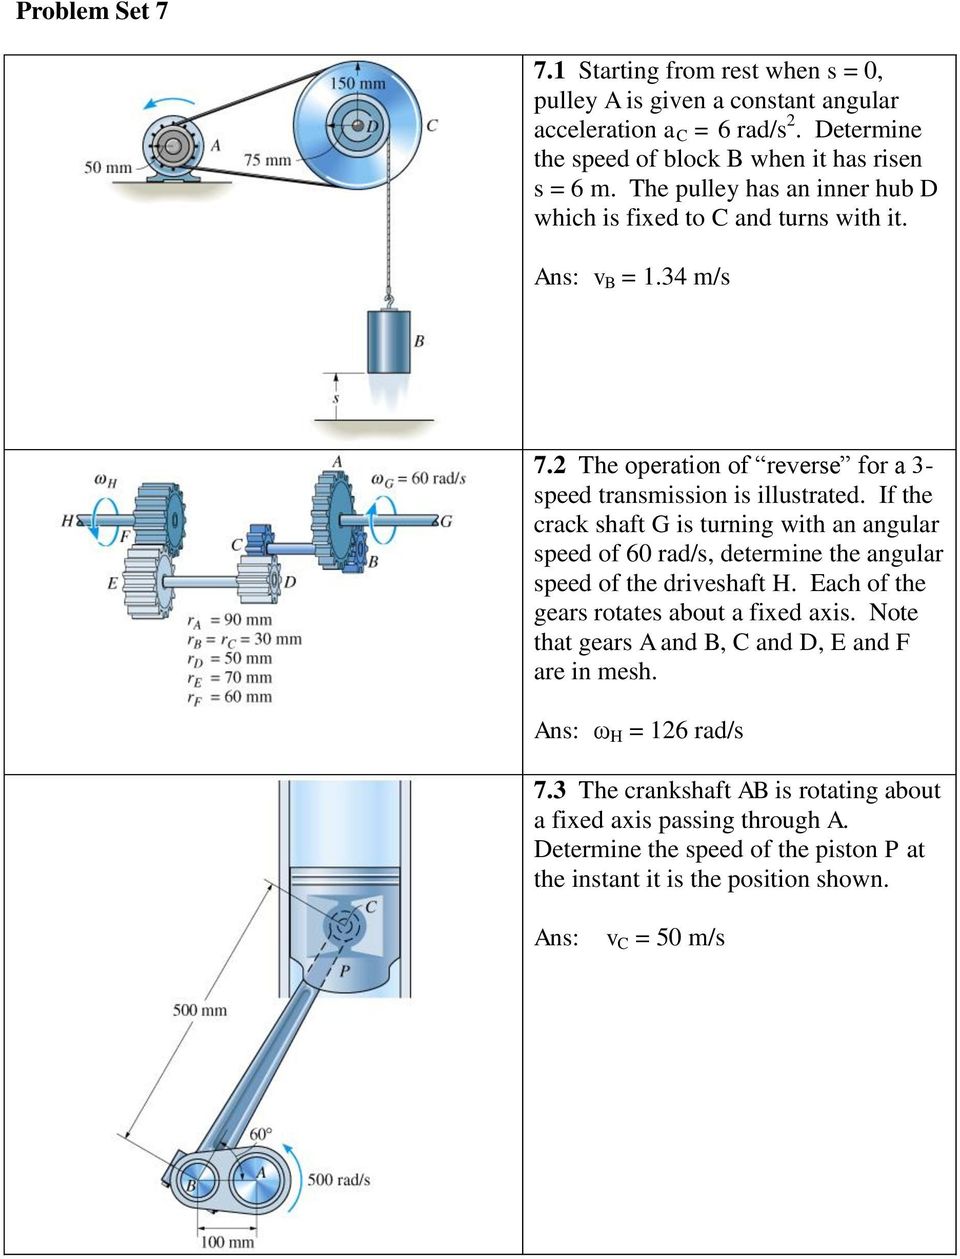 If the crack shaft G is turning with an angular speed of 60 rad/s, determine the angular speed of the driveshaft H. Each of the gears rotates about a fixed axis.